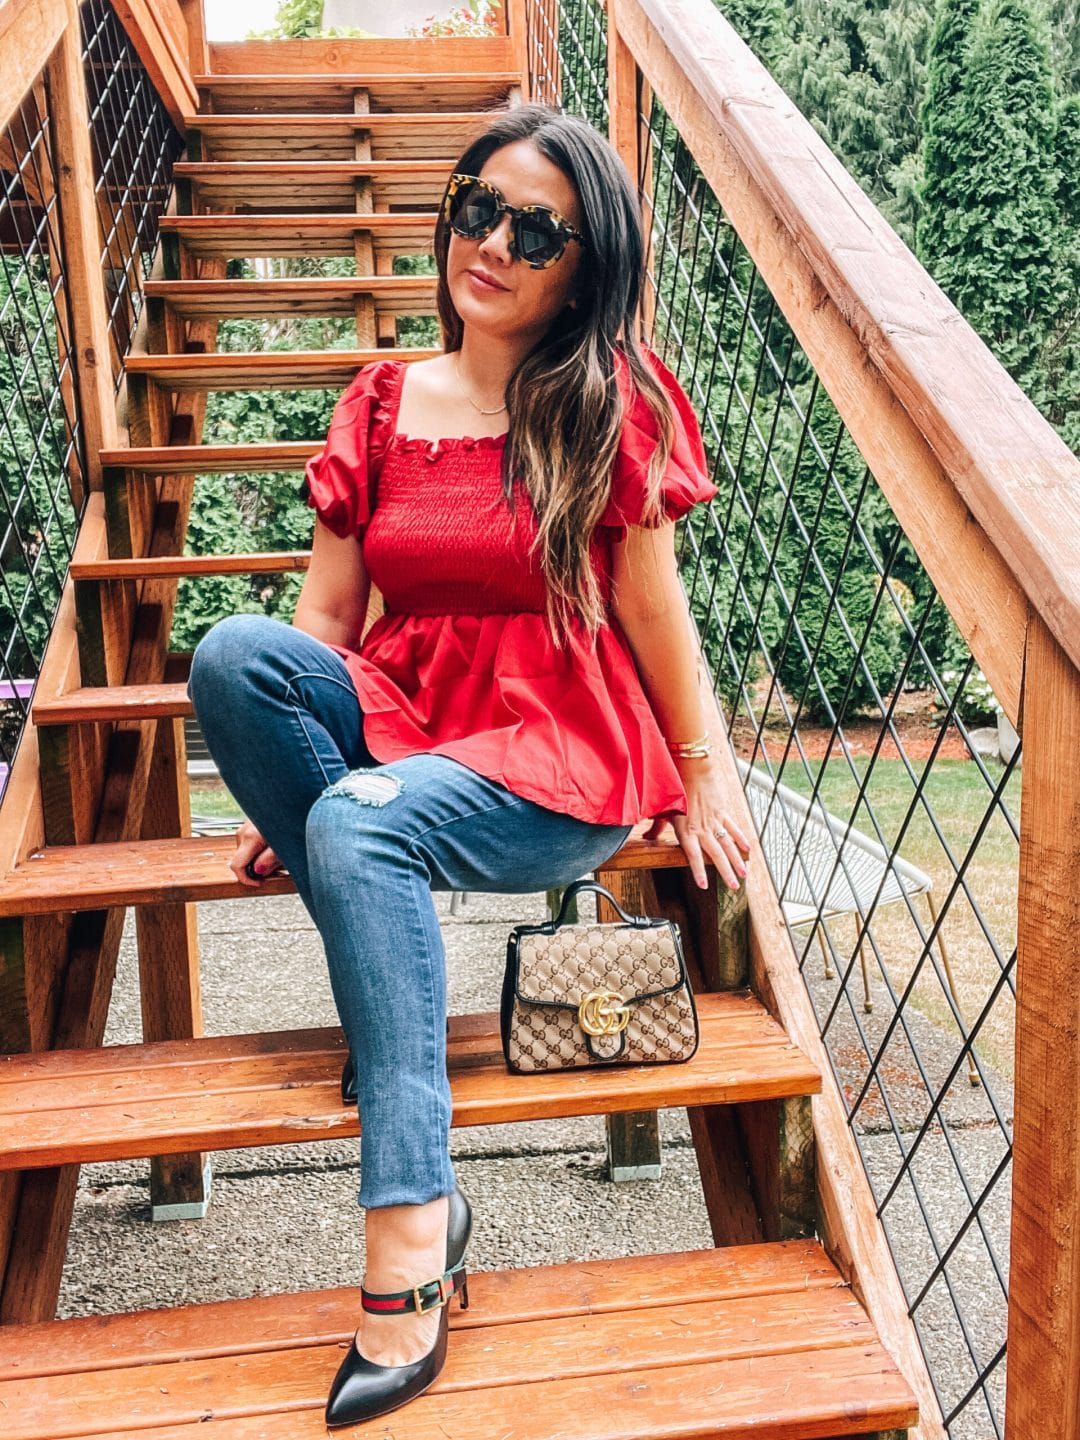 OOTD- RED BODYSUIT WITH BLUE RIPPED JEANS 